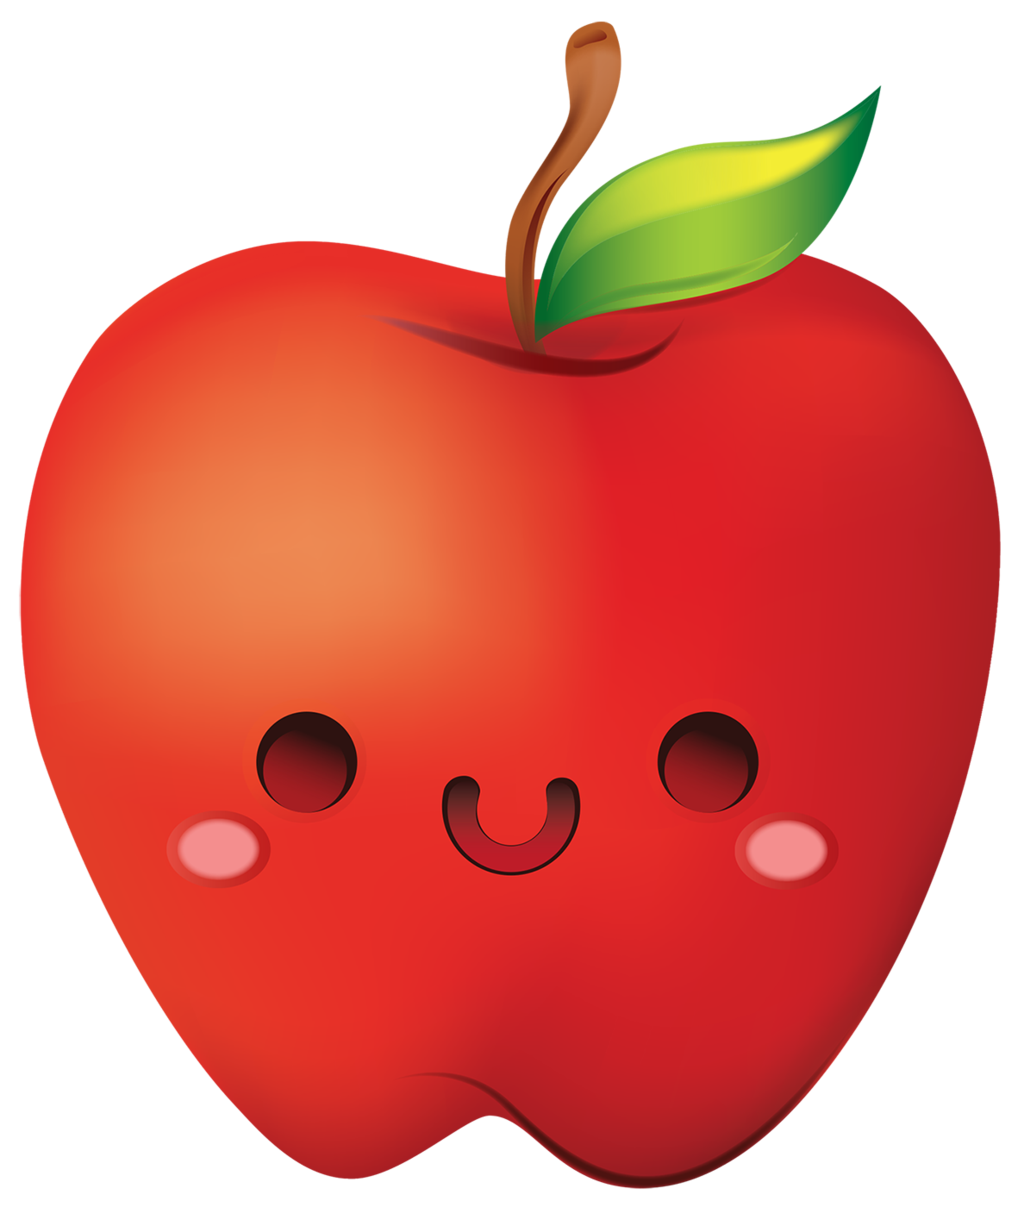 clipart apple with face - photo #12